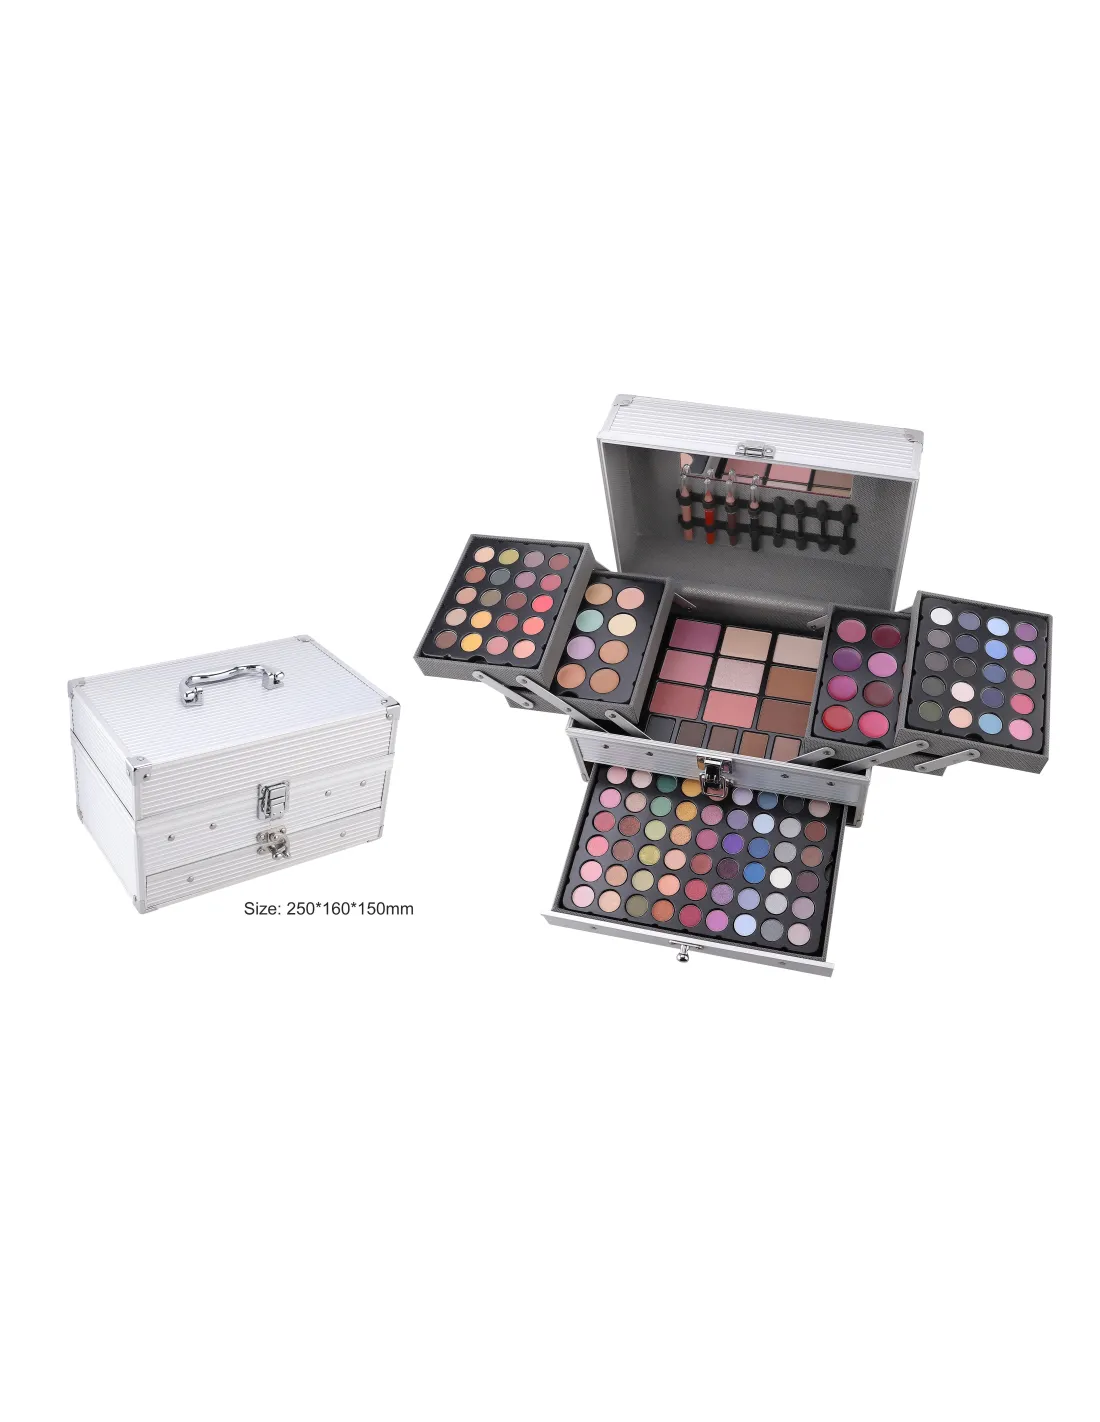 Maletín Maquillaje Profesional Travel Mya Colores |33€